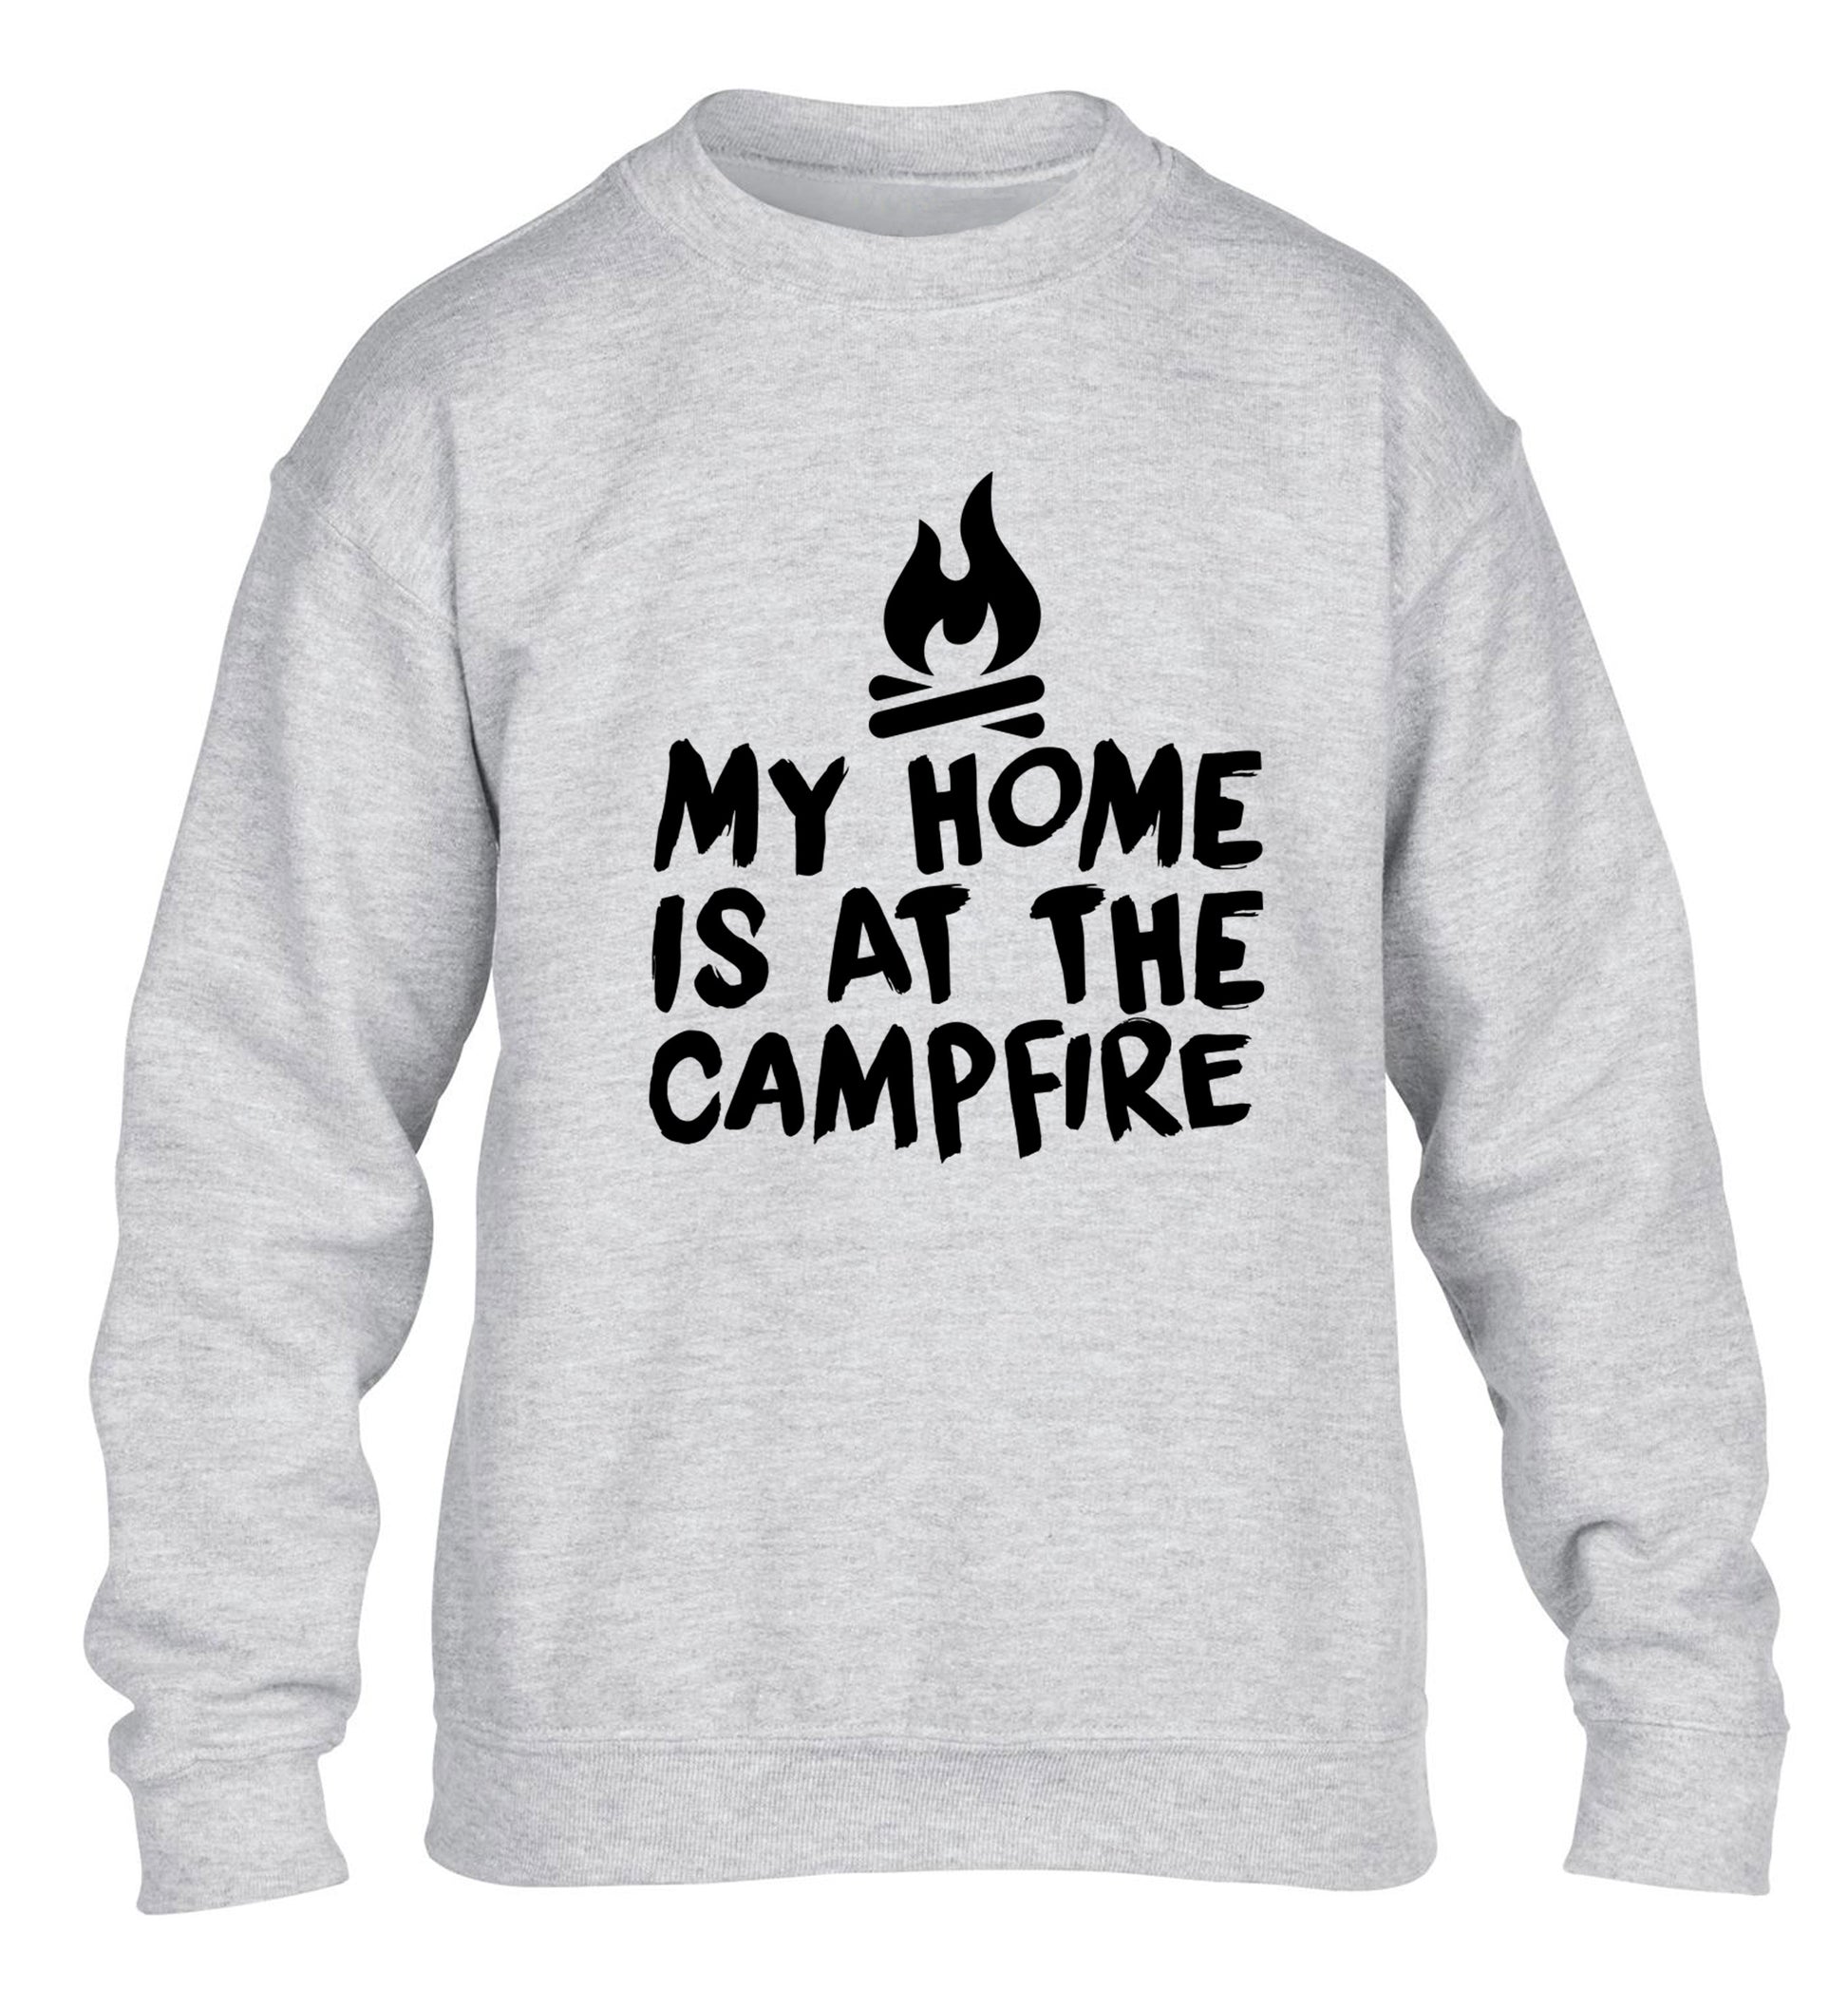 My home is at the campfire children's grey sweater 12-14 Years